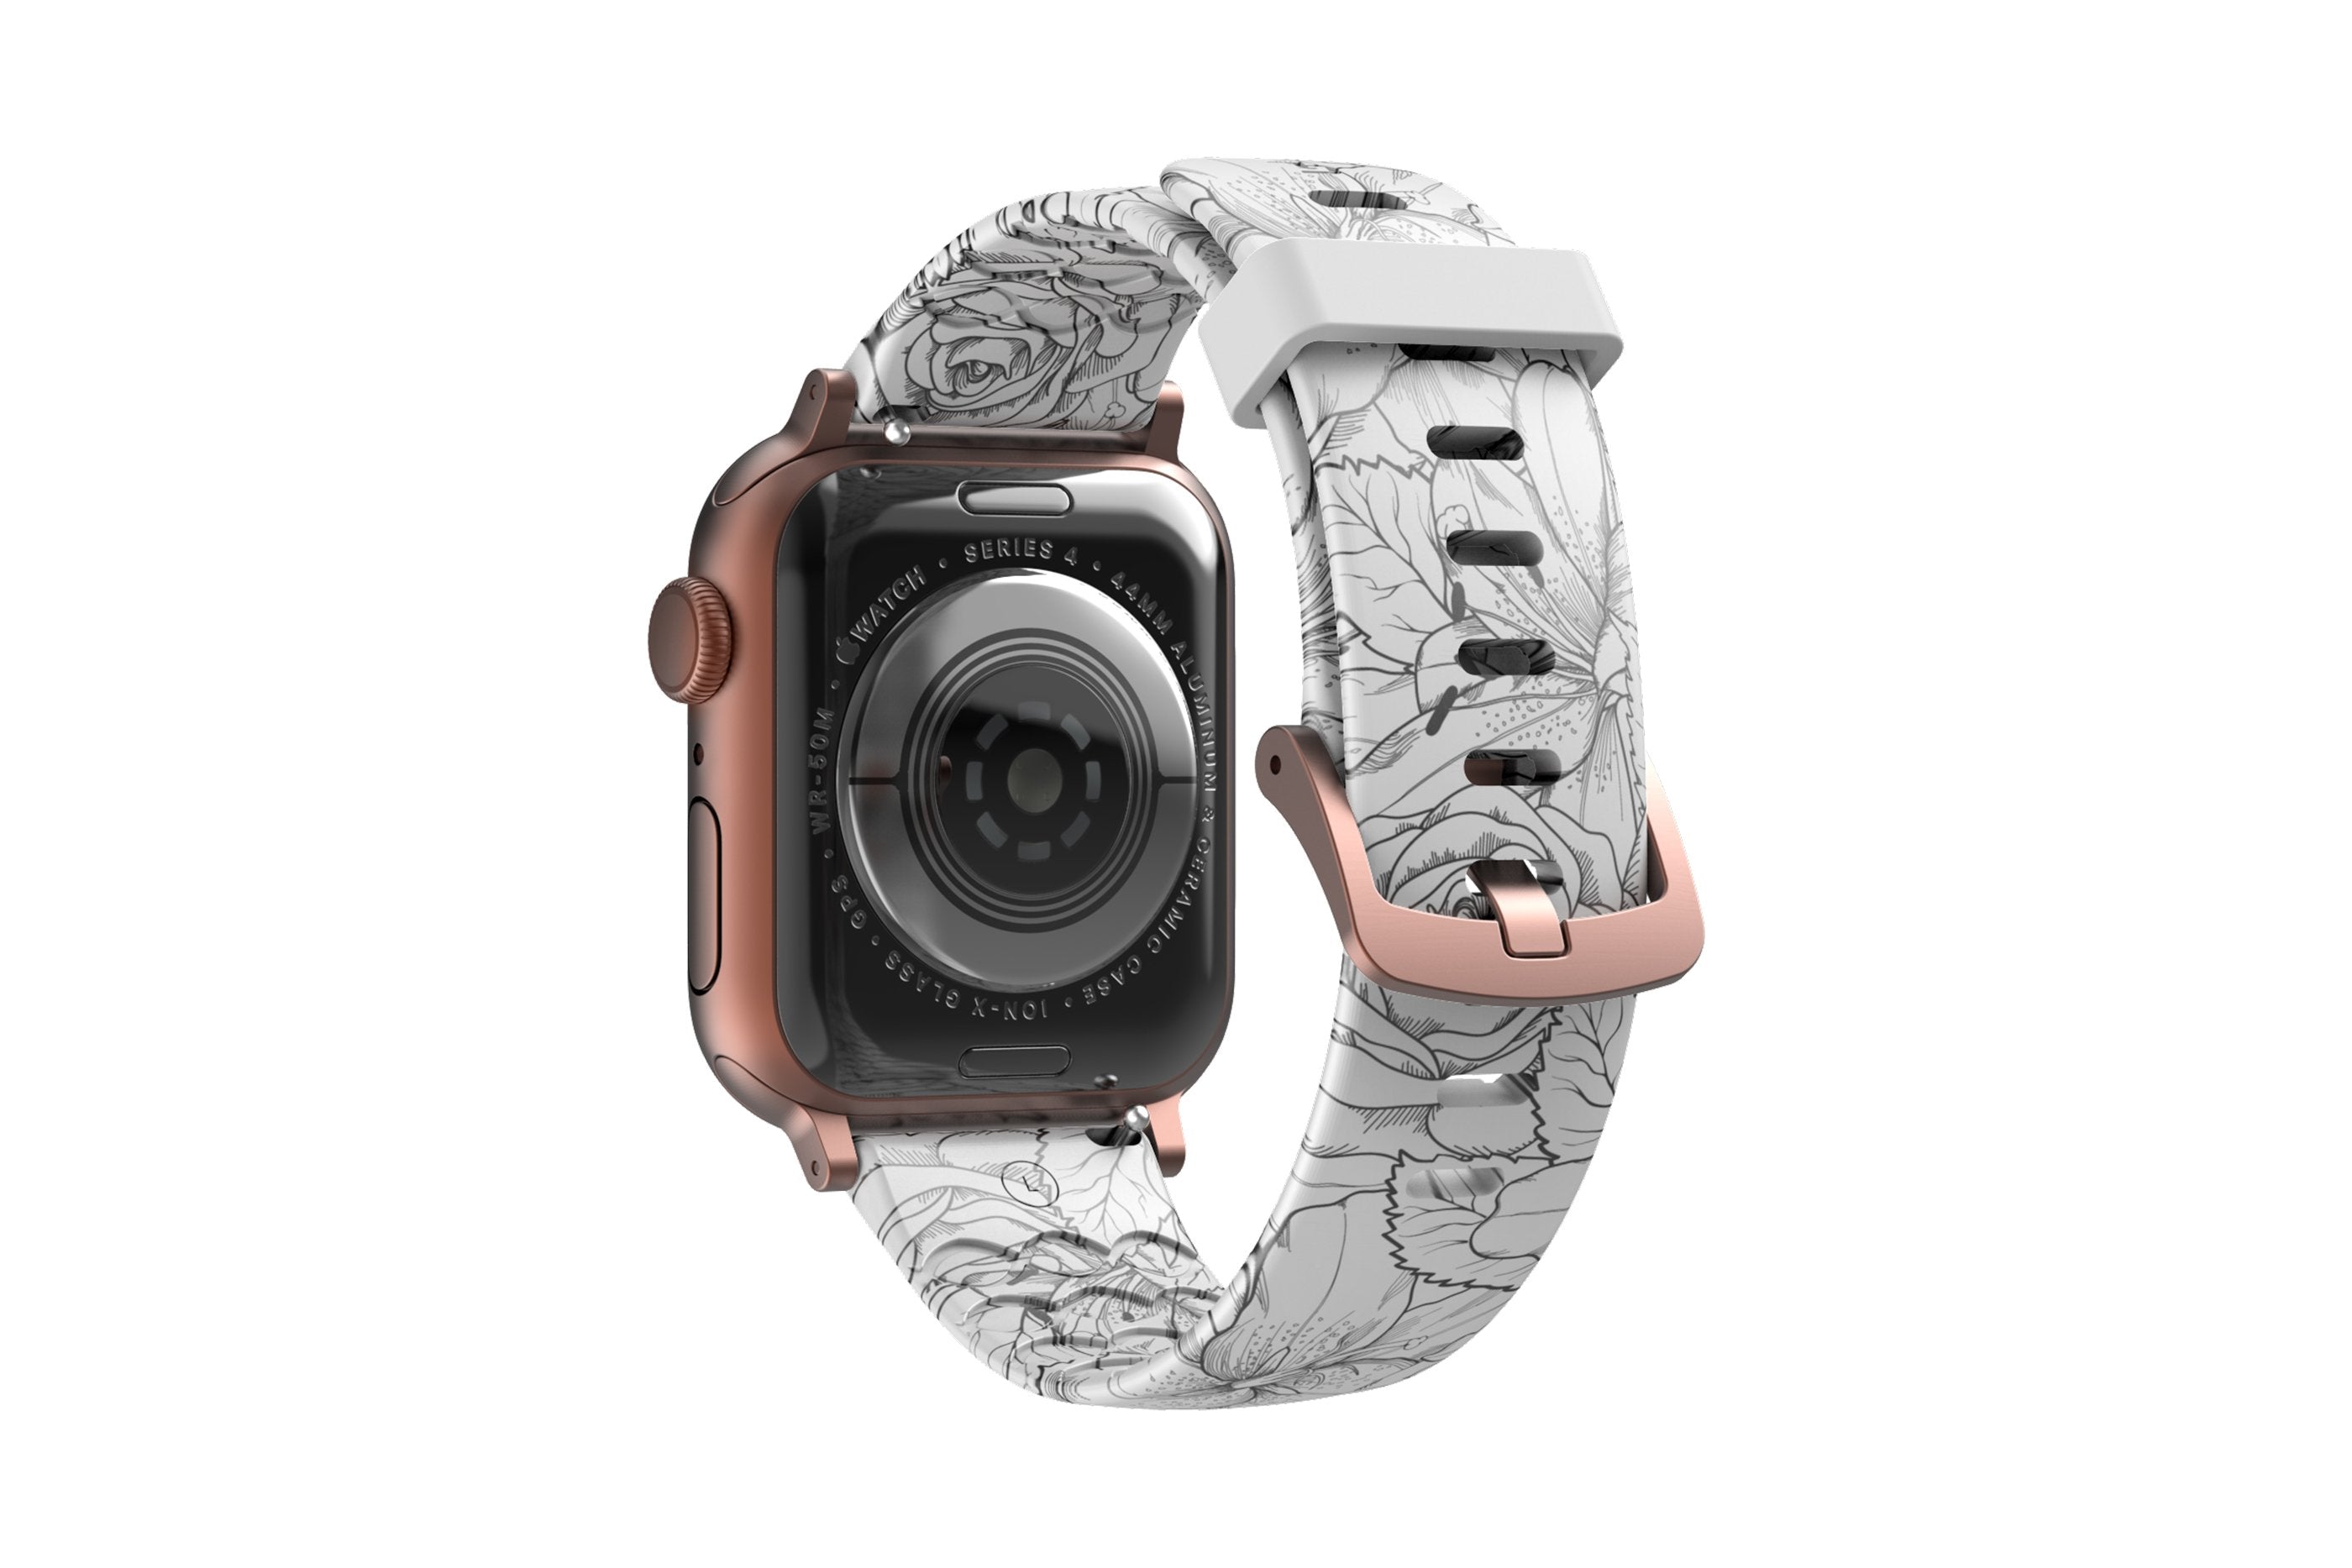 Winter Rose Apple Watch Band with rose gold hardware viewed from rear